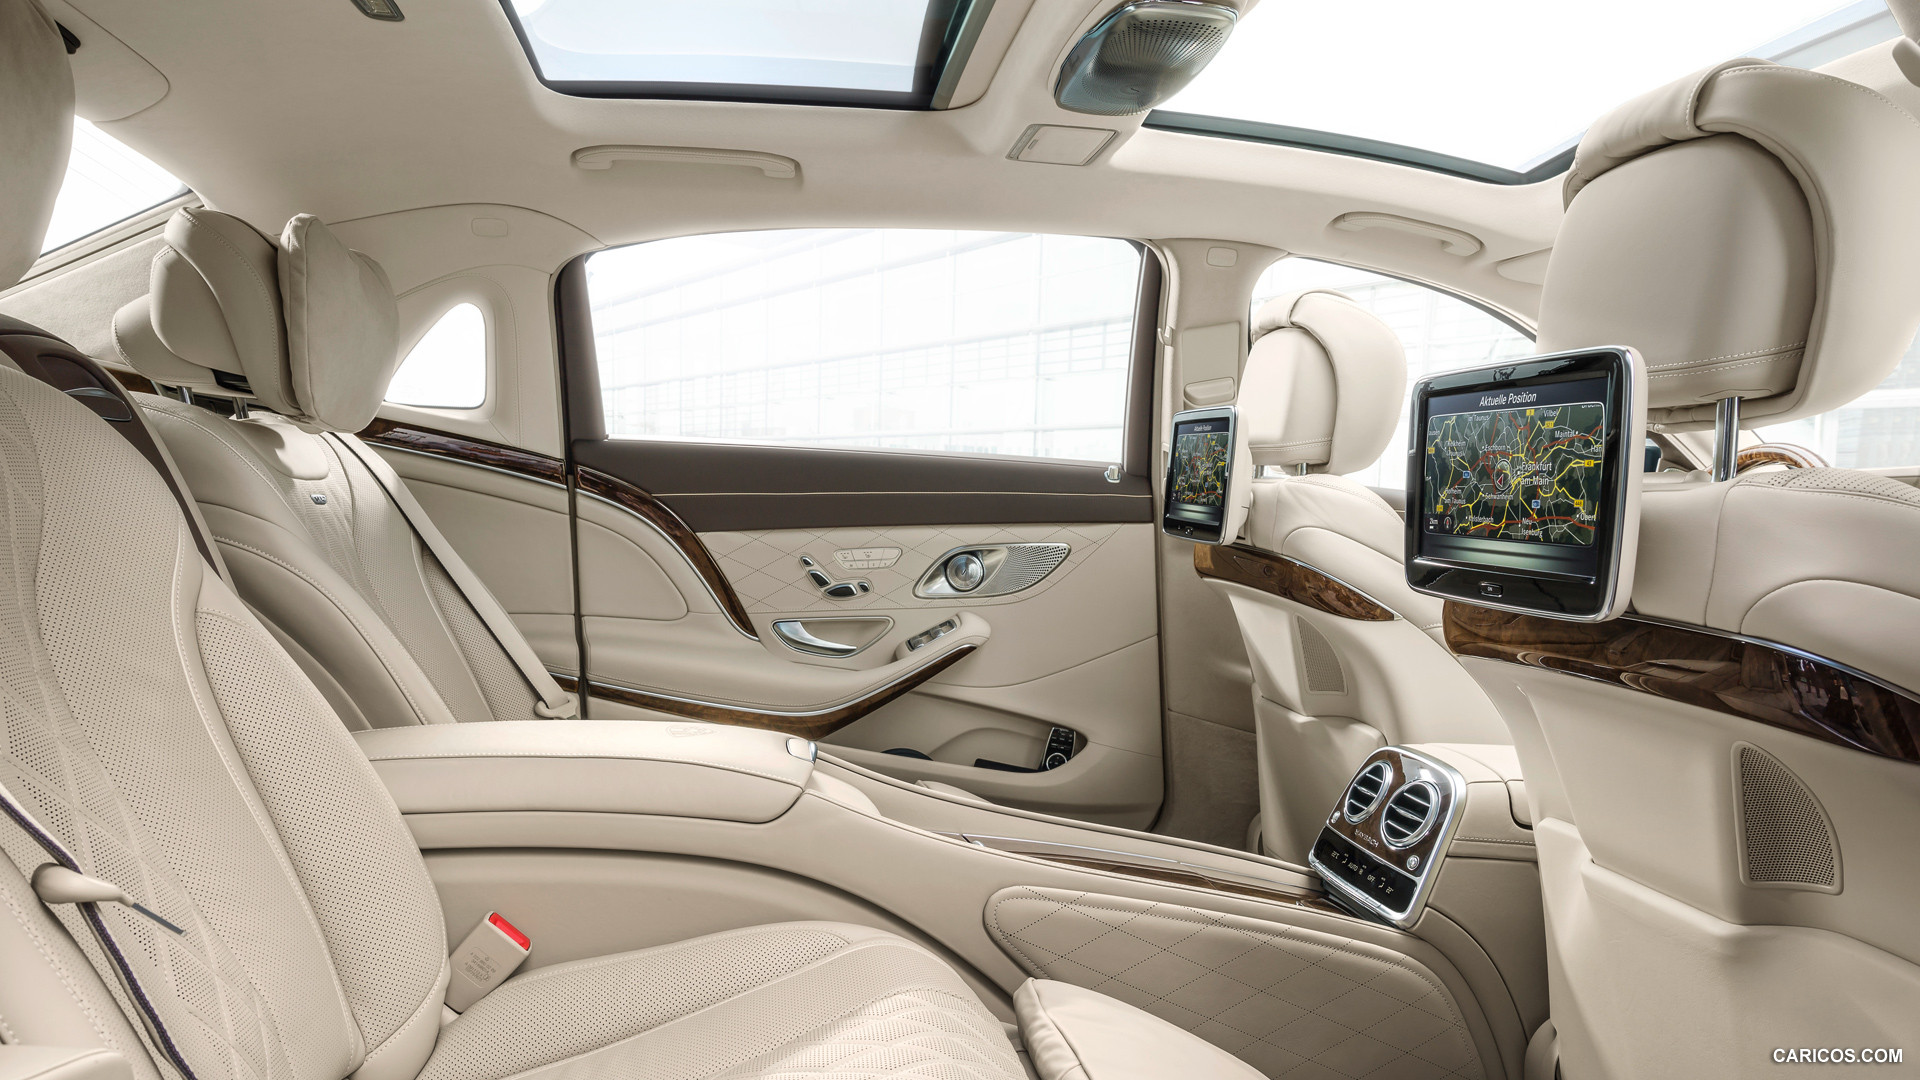 2016 Mercedes-Maybach S-Class S600 - Interior Rear Seats, #40 of 225